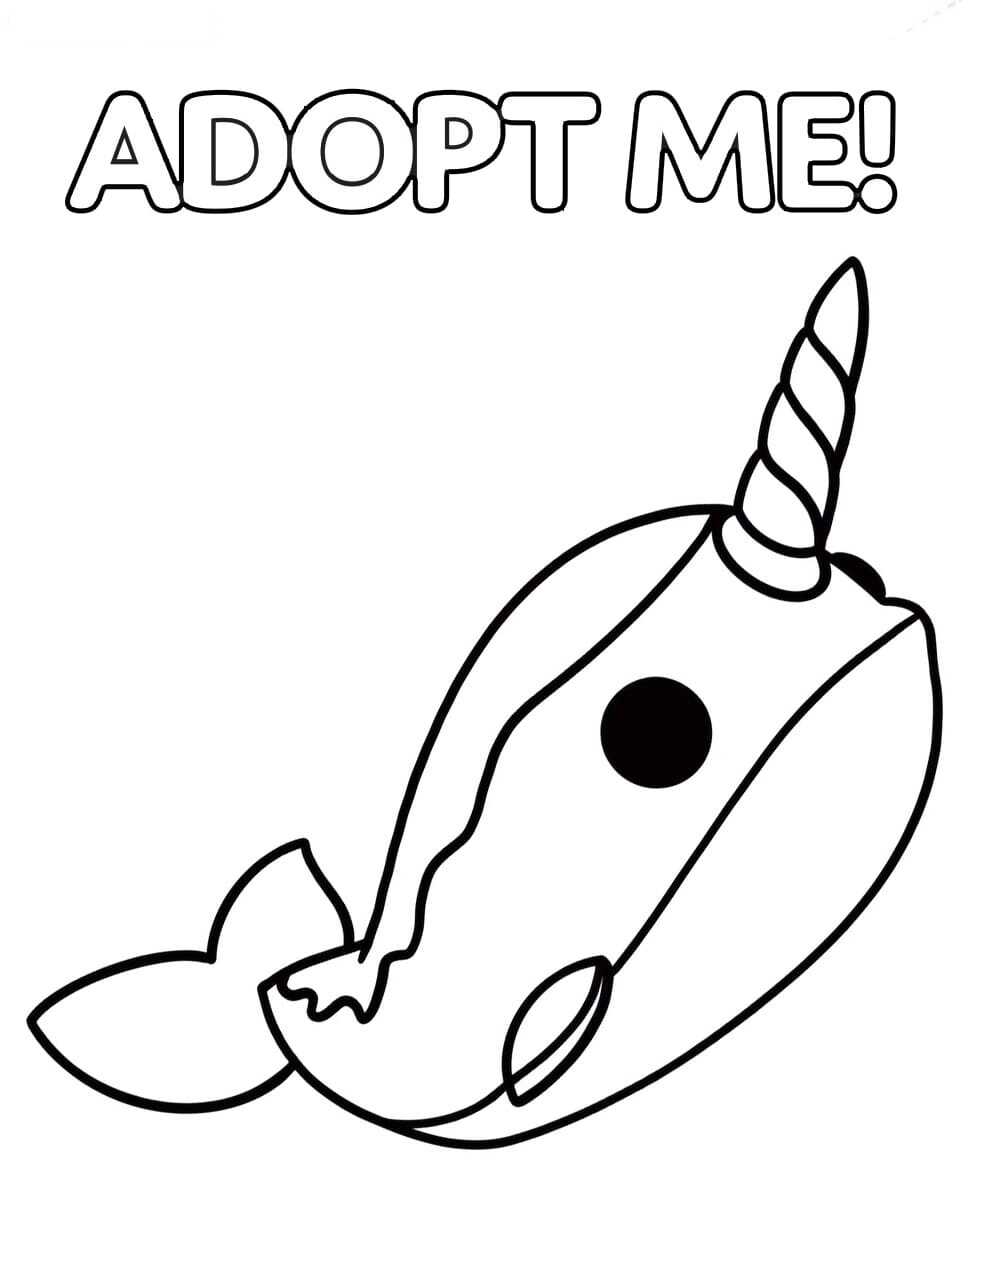 Adopt me the Narwhal has a tusk on top, with its tail fins at the back Coloring Pages